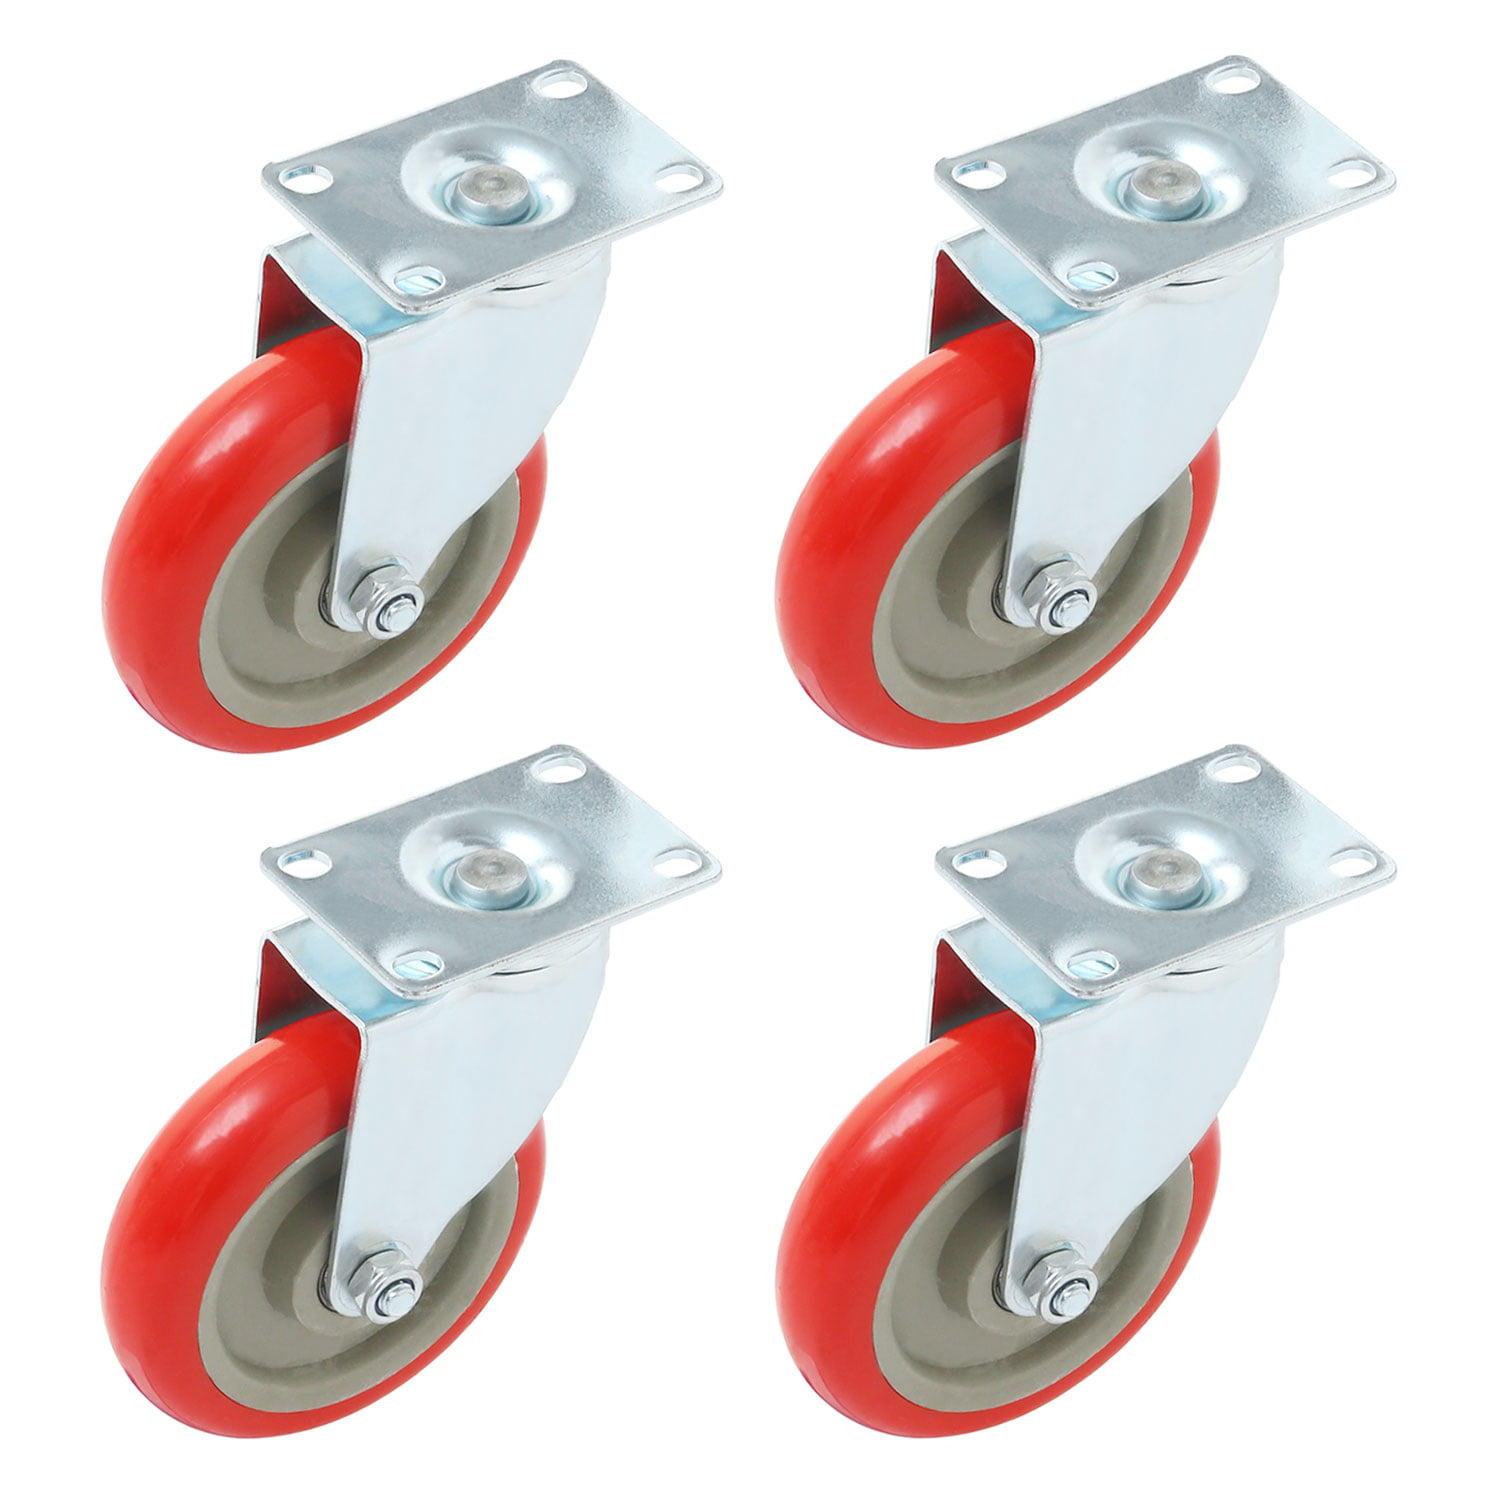 5 Pcs Swivel Plate PU Caster Wheels Replacement for Carts 3 inch 